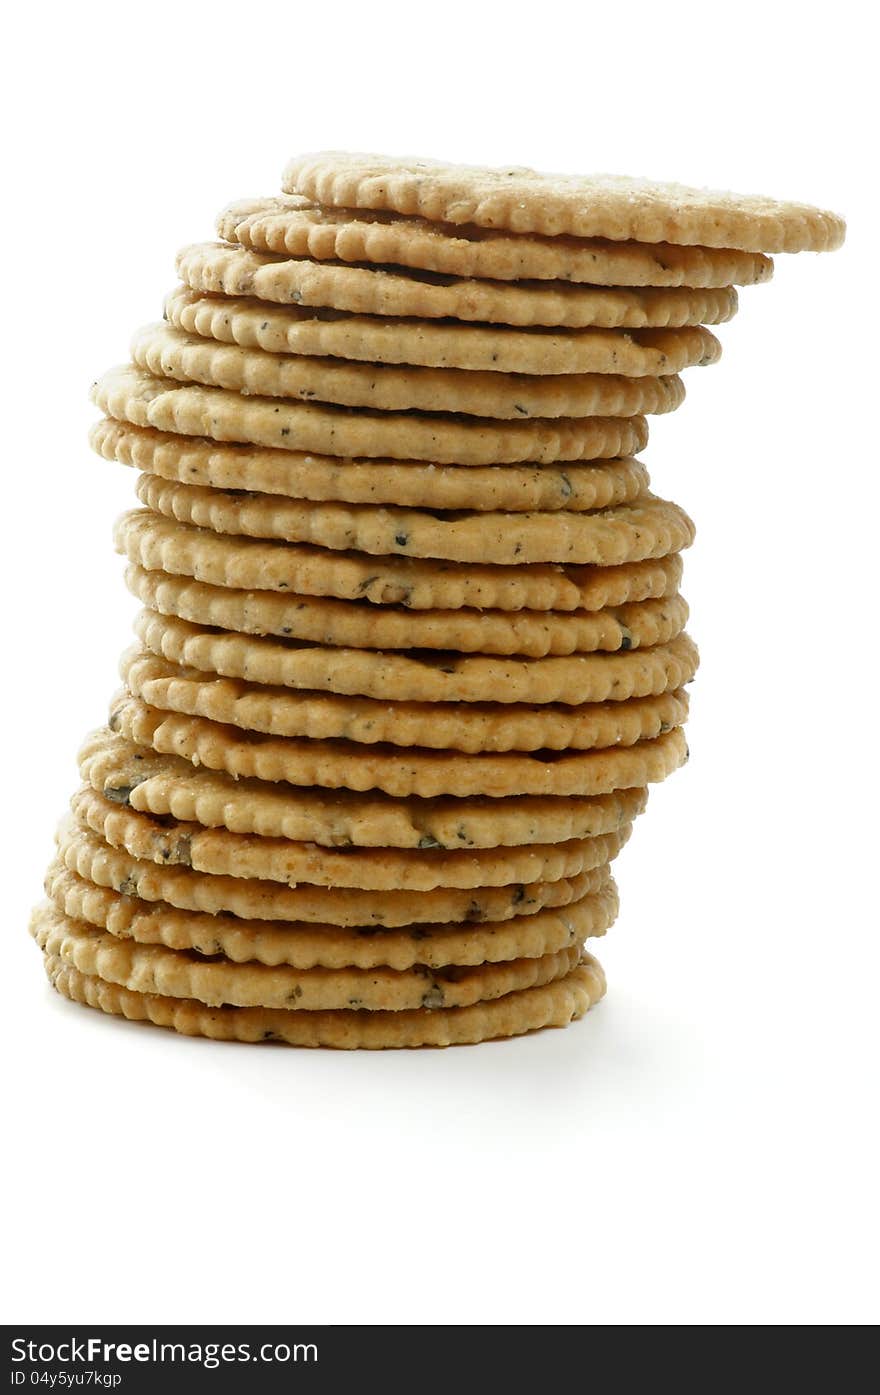 Stack of Dry Biscuits closeup isolated on white background